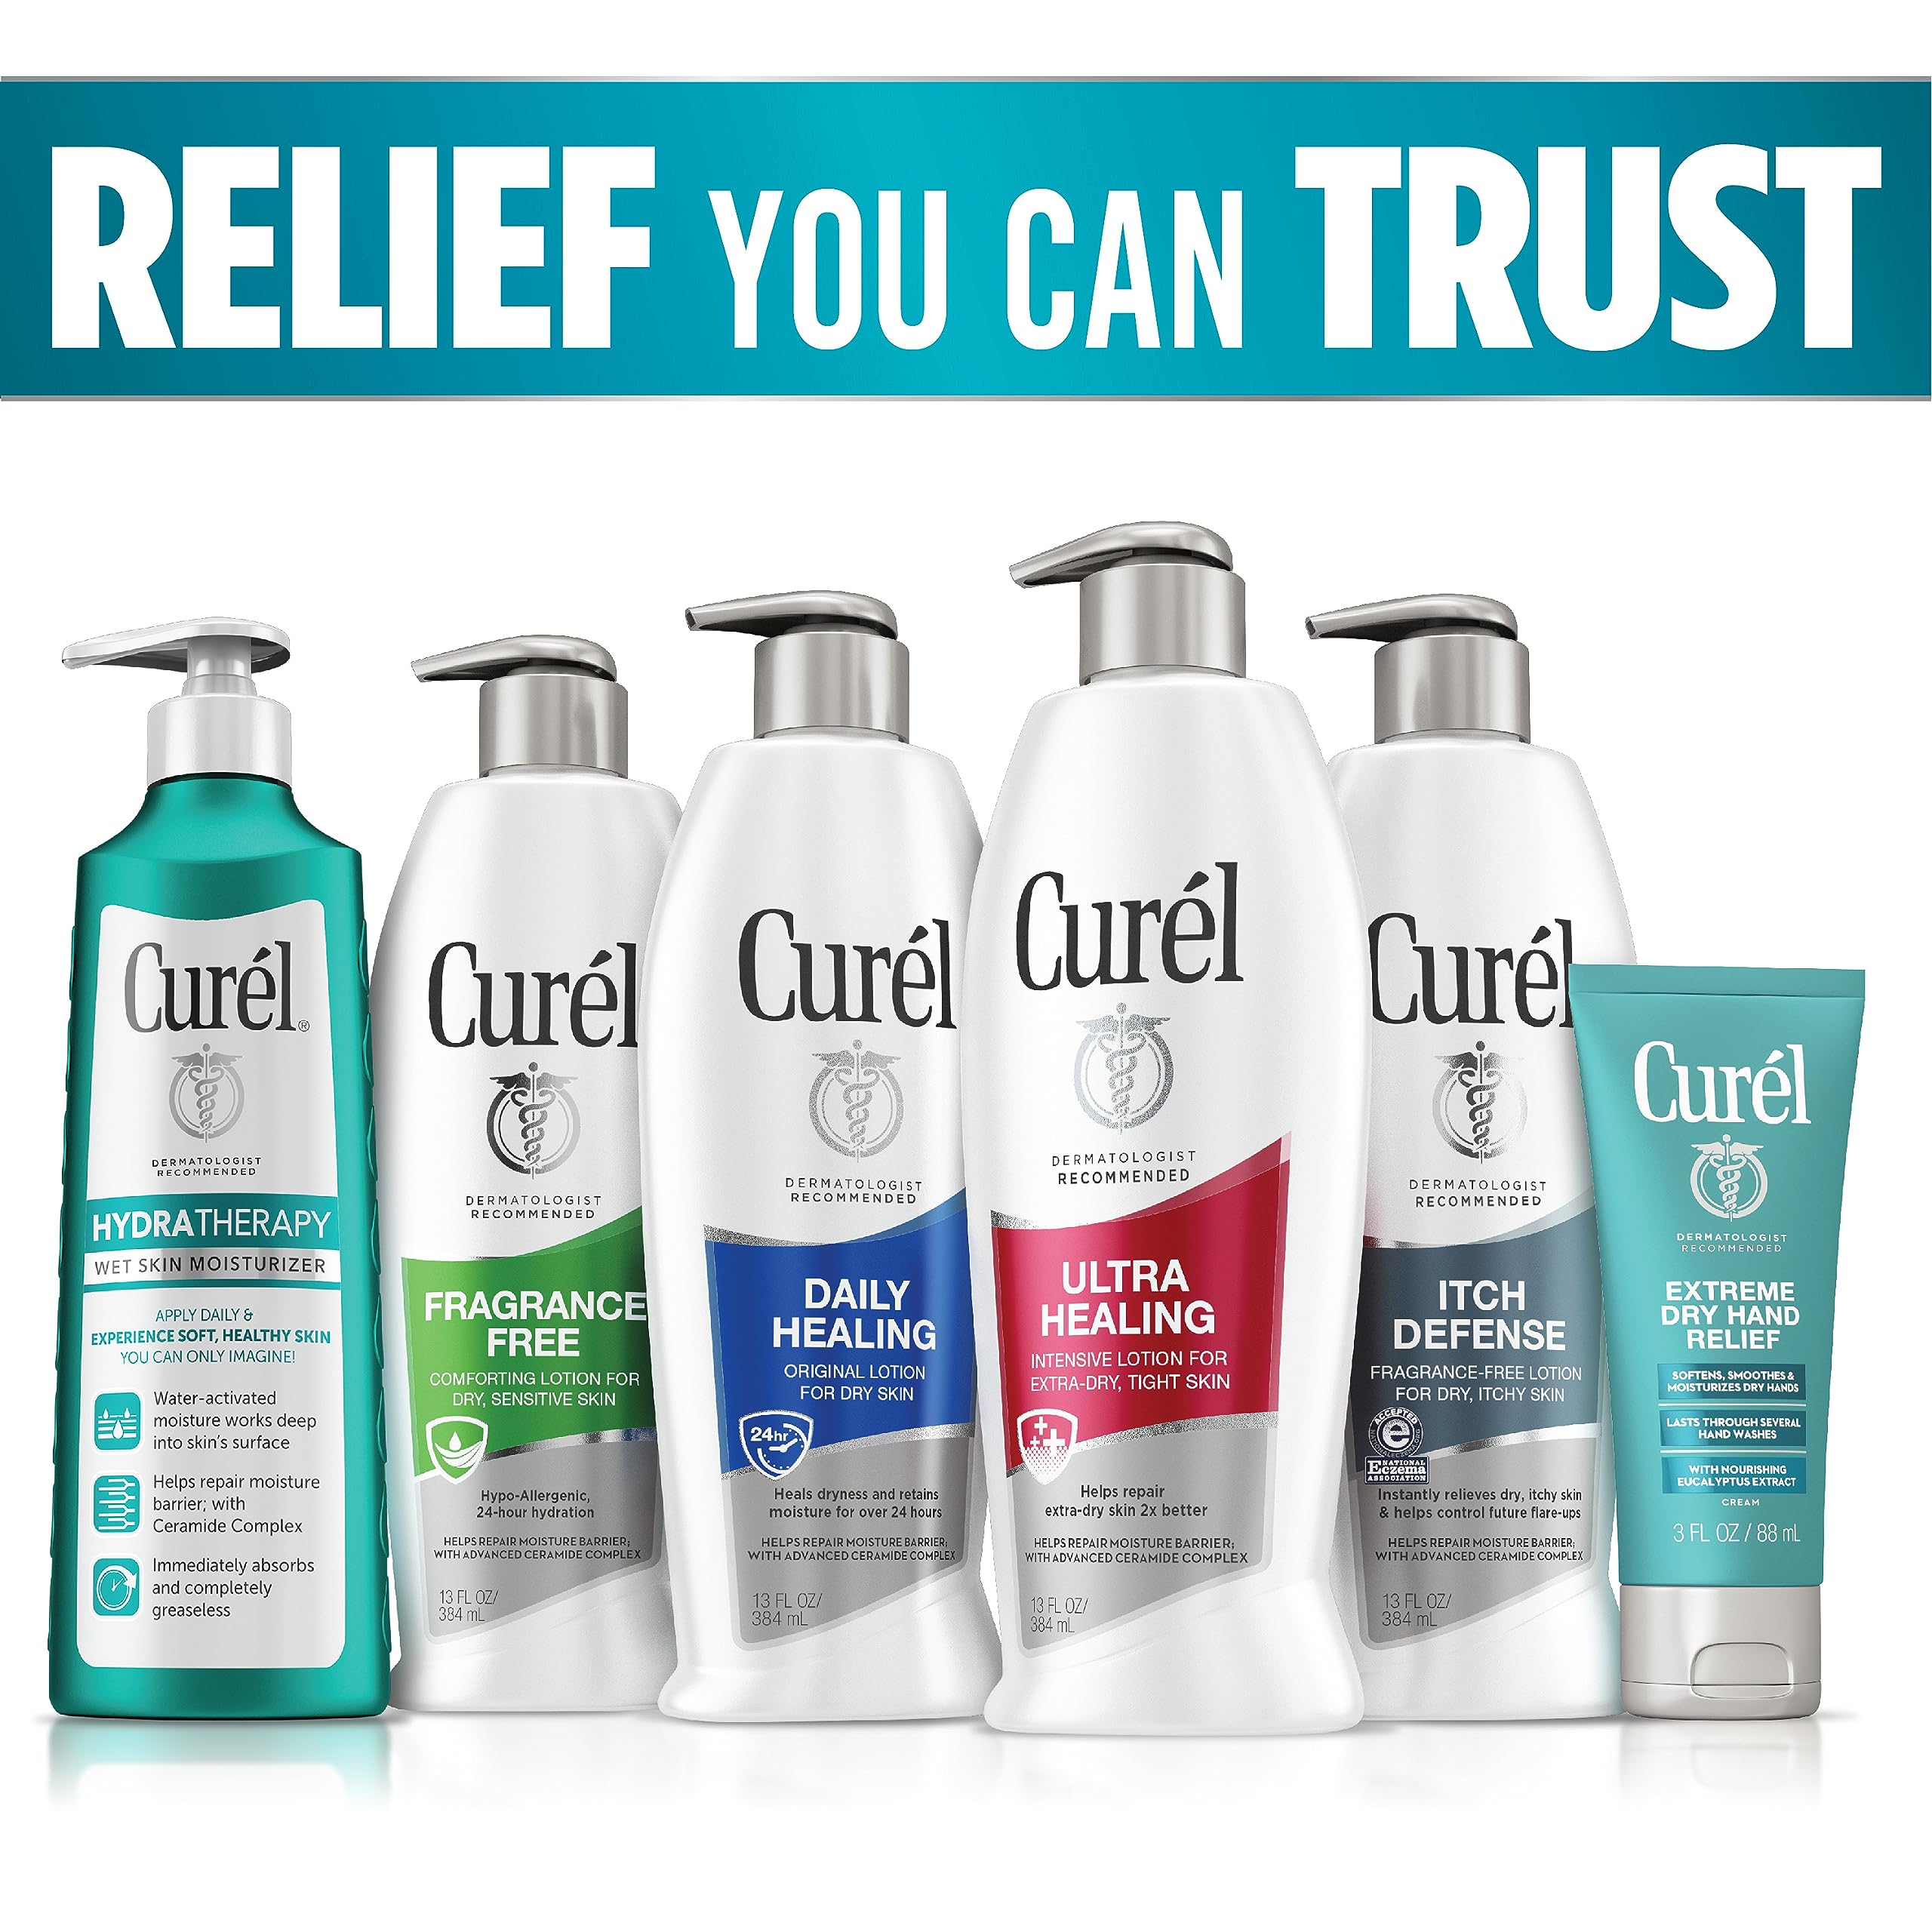 Curel Cream, Soothing Lotion for Dry Cracked Feet, with Shea Butter and Coconut Milk 3.5OZ 3 Pack